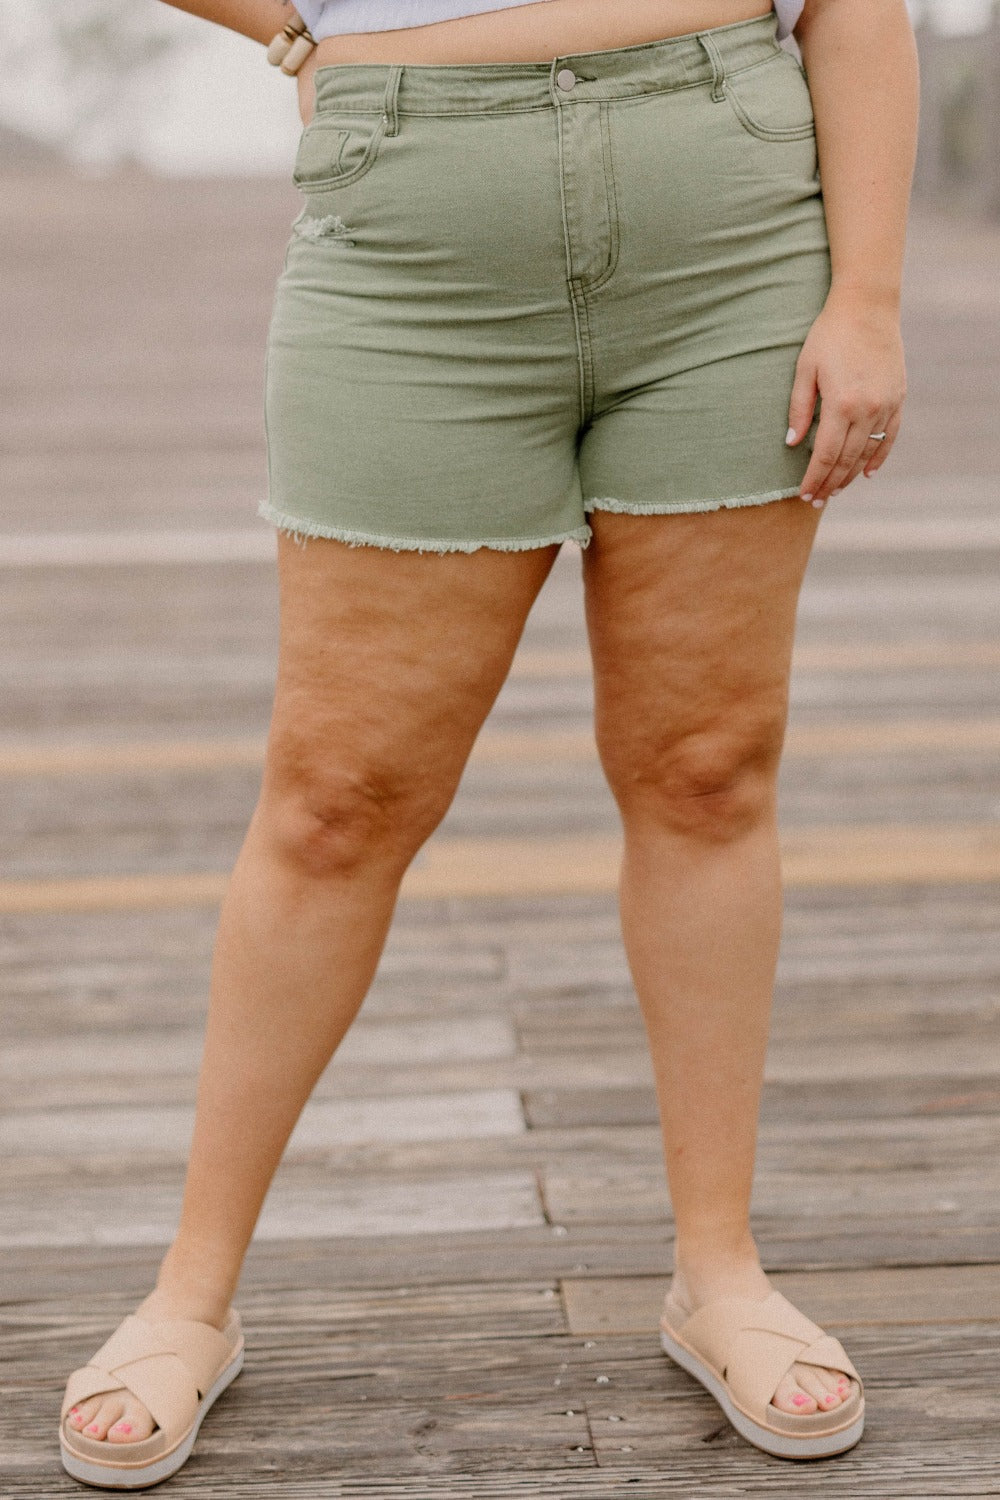 Curvy + Plus Size Denim Shorts in Washed Olive by Hayden LA available at Studio 3:19